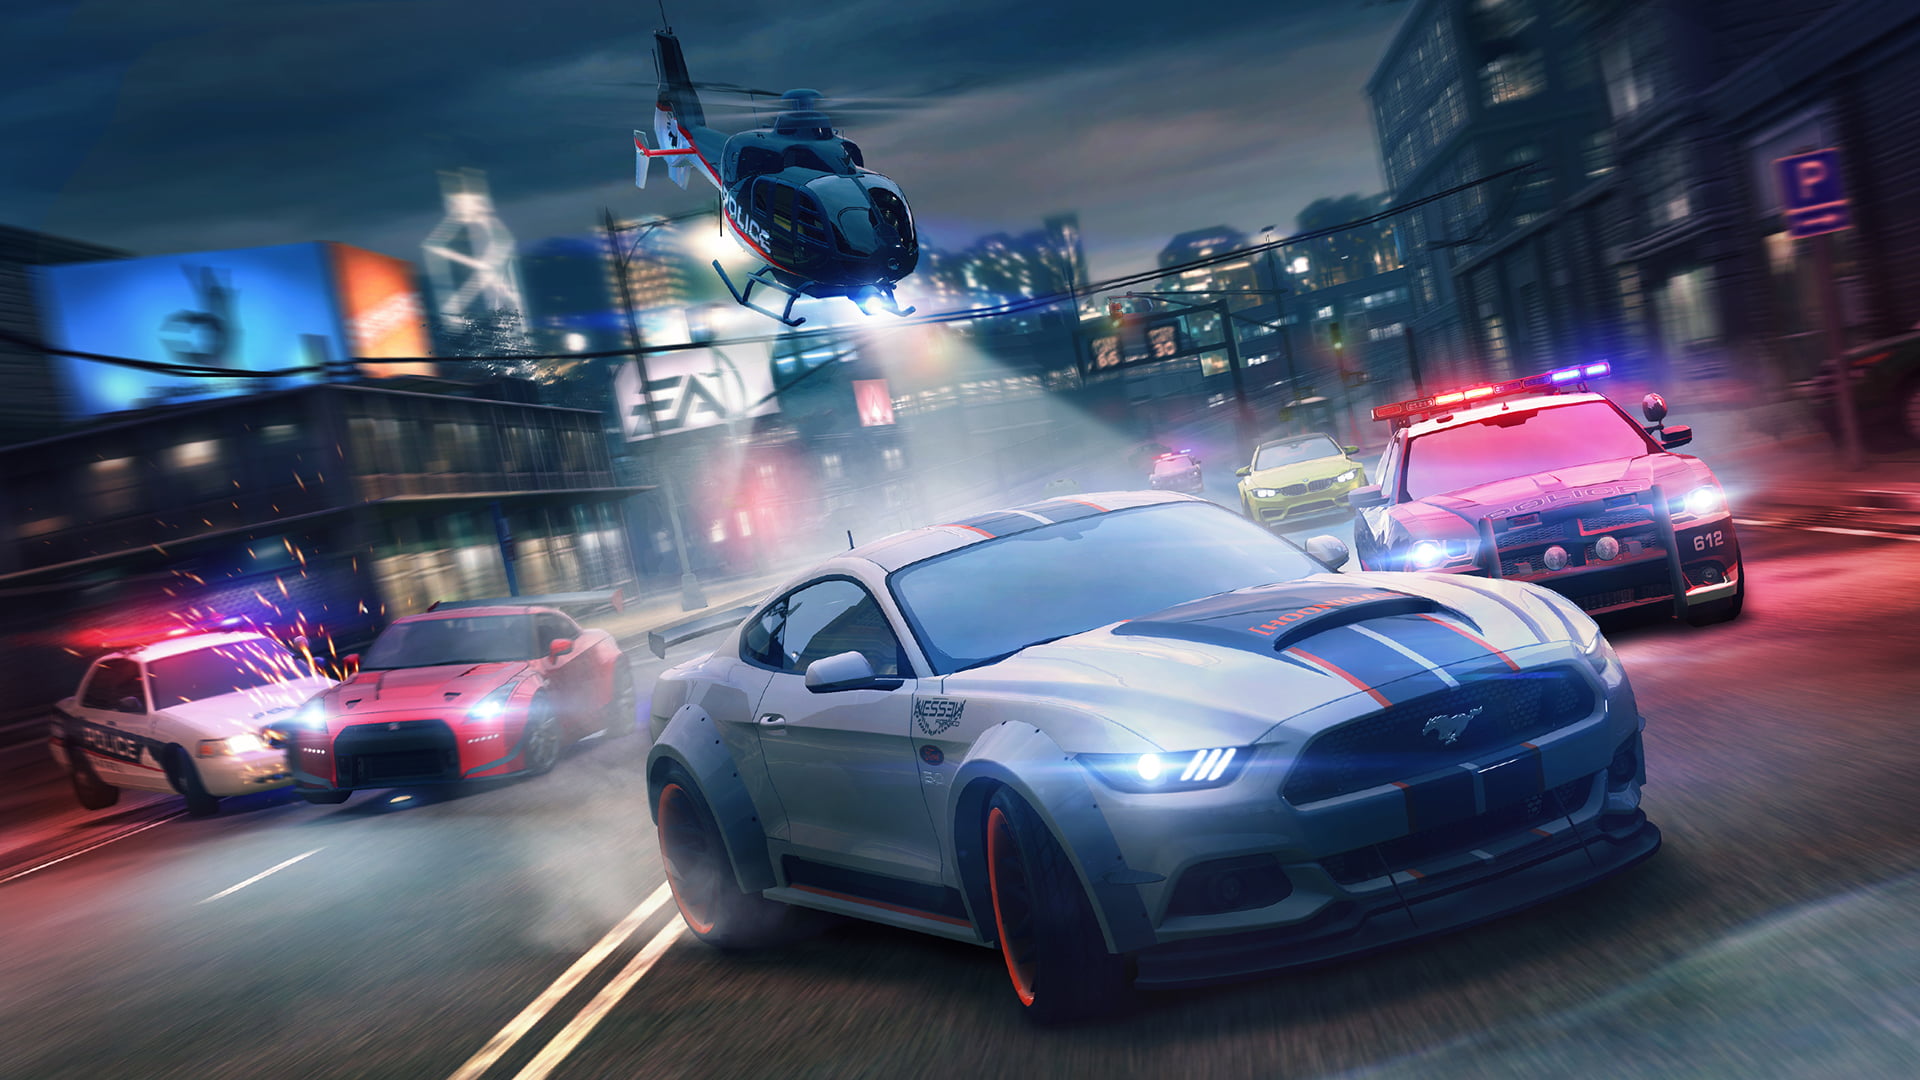 Ford Shelby coupe illustration, Need for Speed: No Limits, video games, night, city